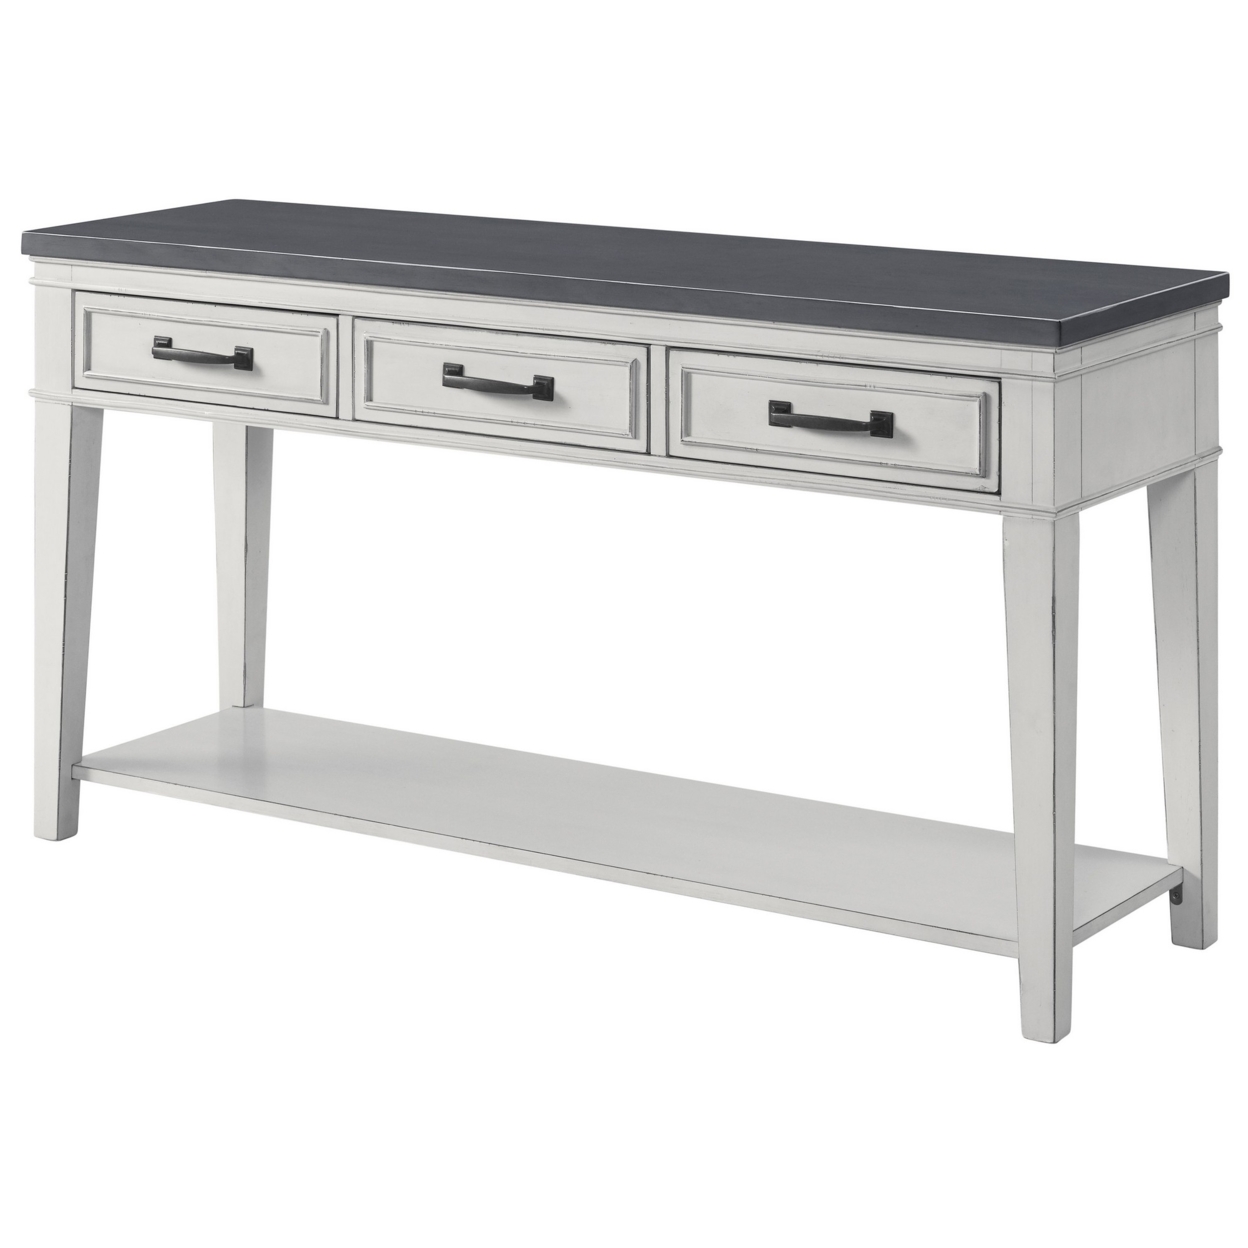 55 Inch 3 Drawer Console Table With Bottom Shelf, White And Gray- Saltoro Sherpi